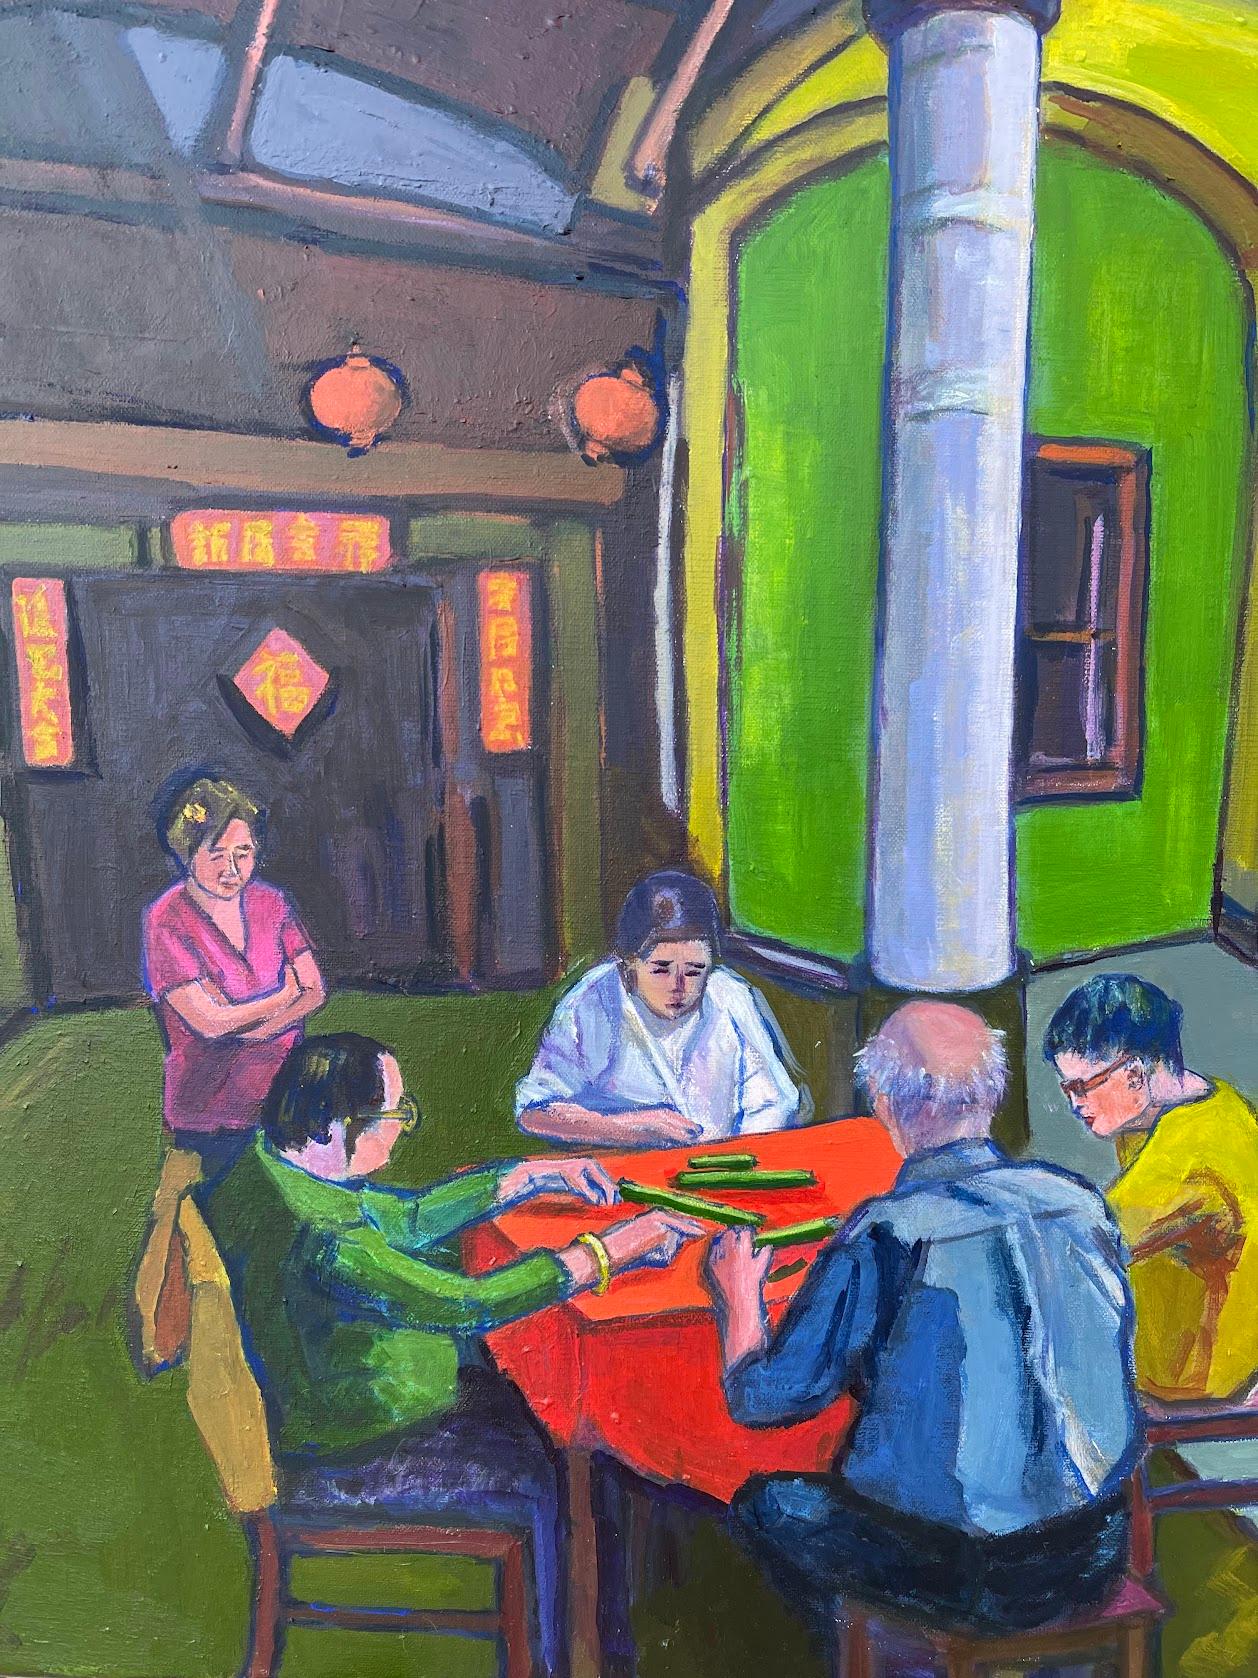 <p>Artist Comments<br>In a neighborhood building, old friends huddle around a worn table to play mahjong. Their eyes are focused on the tiles, thinking of the best strategy to win the game. The soft light from an open area casts gentle shadows onto